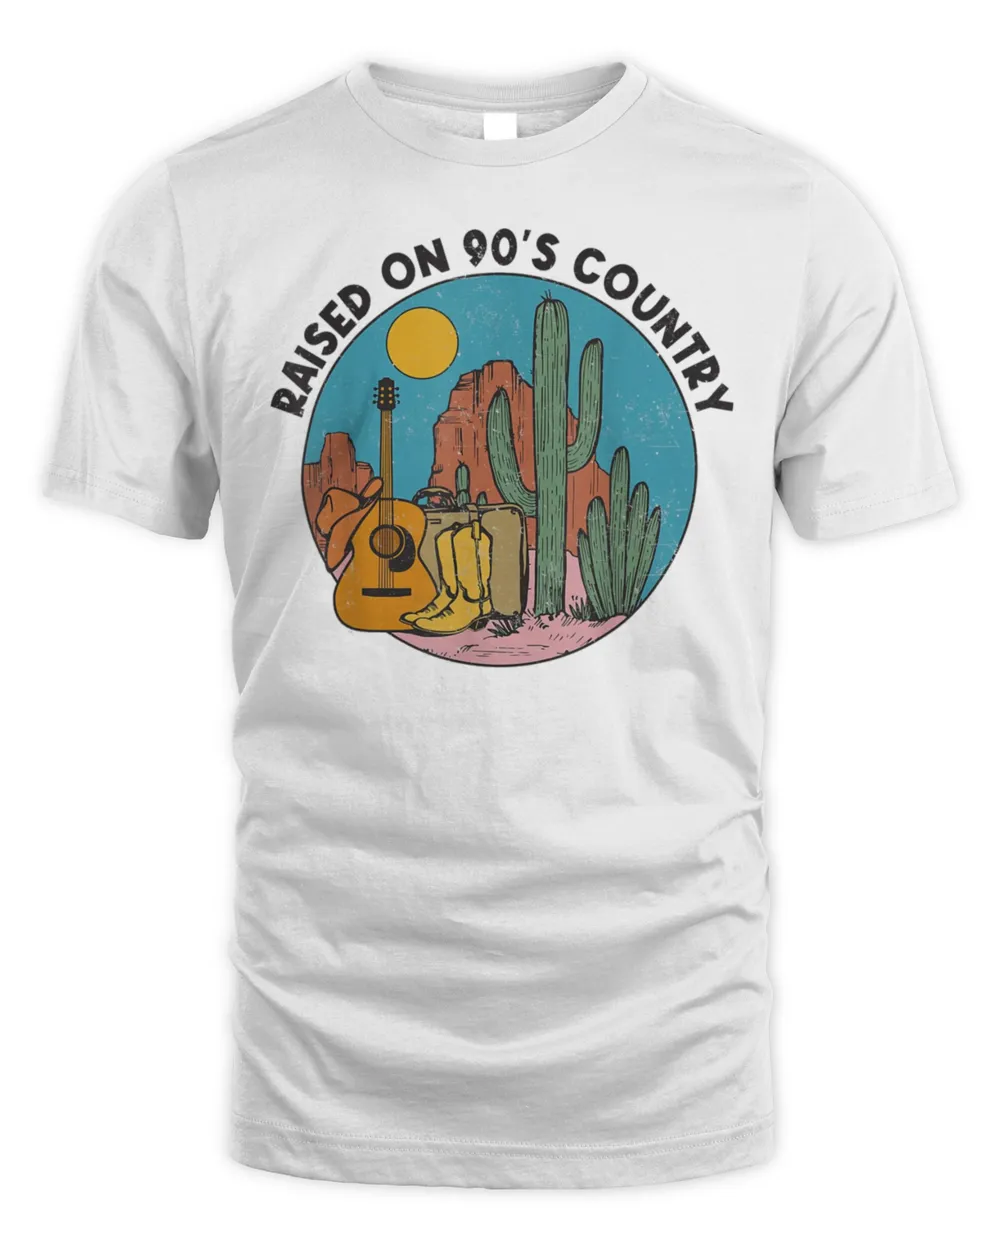 Raised On 90’s Country Music Vintage Southern Western T-Shirt Unisex Standard T-Shirt white xl